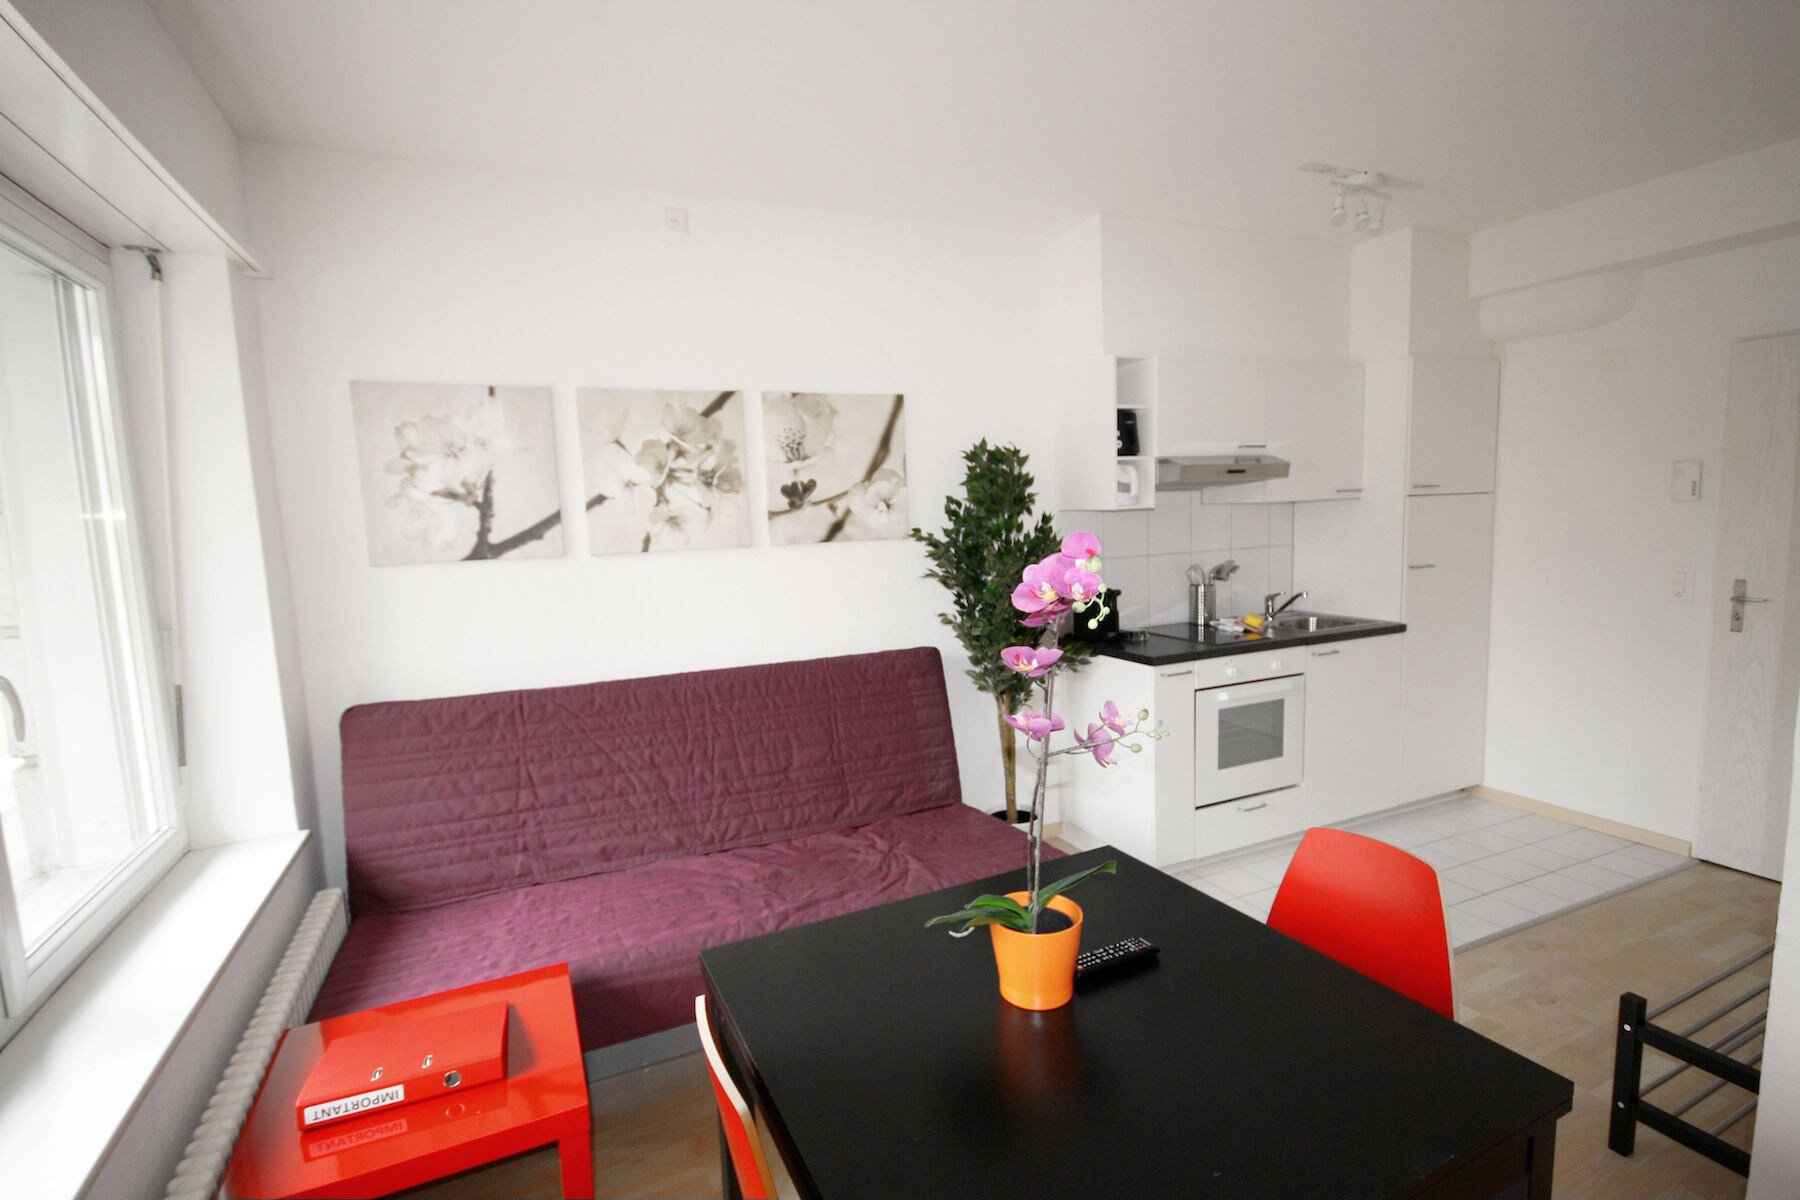 Property Image 1 - ZH Inler - Stauffacher Property Manager Apartment 